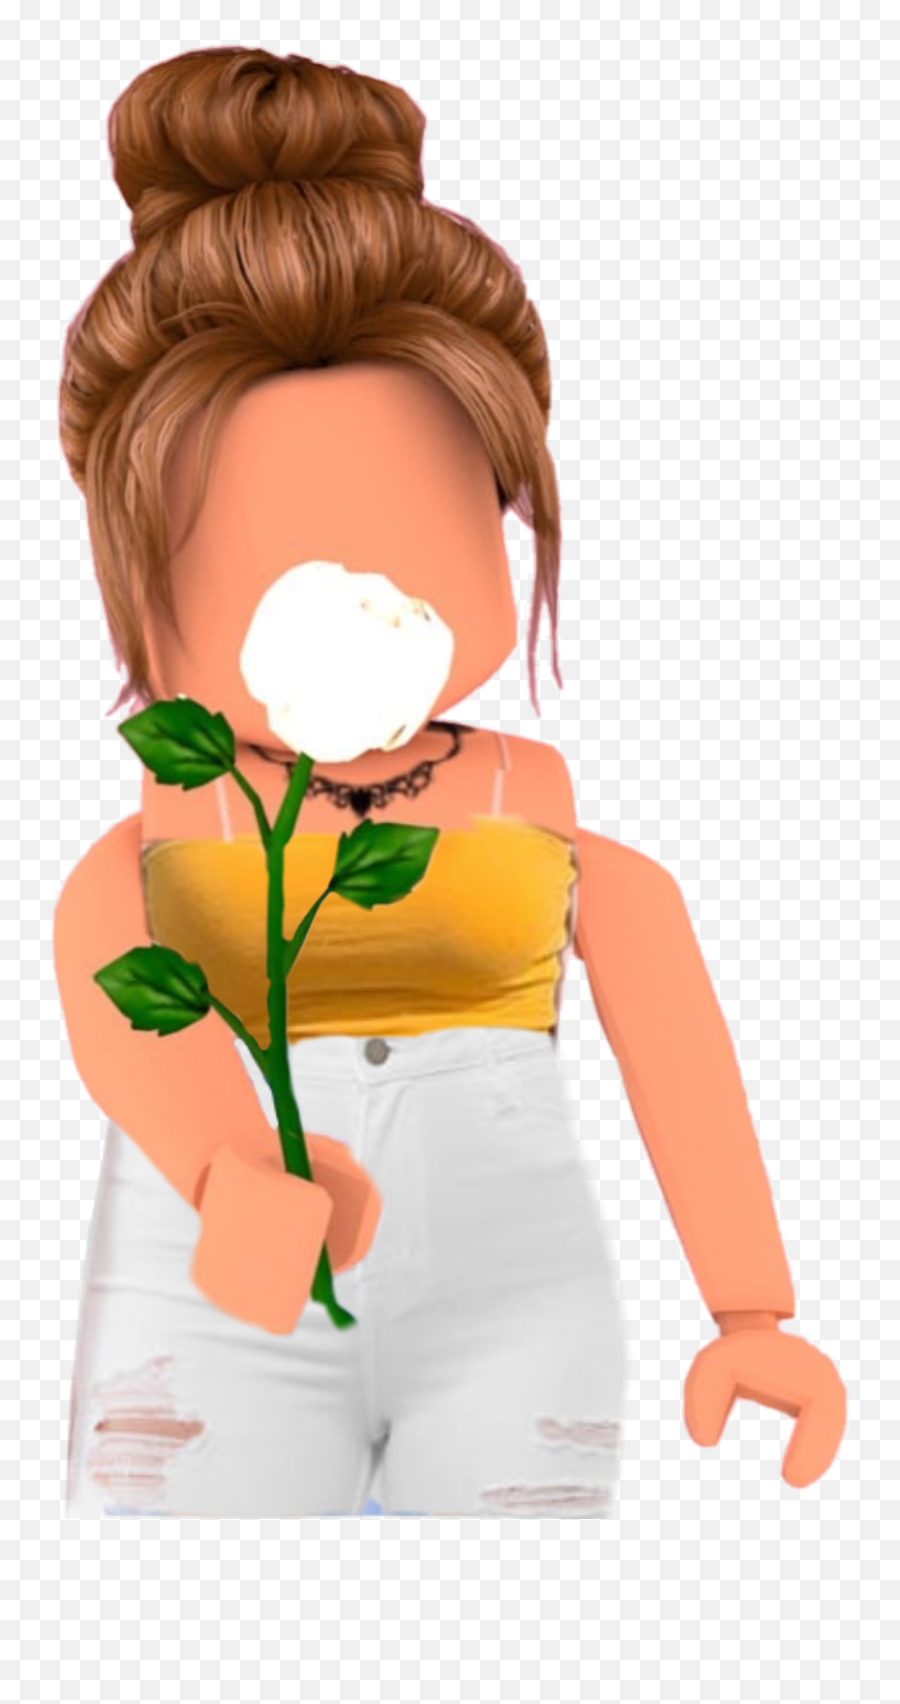 Girl Gril Roblox Sticker - Outfits Roblox Emoji,Female Emoji Faces With Hair In A Bun